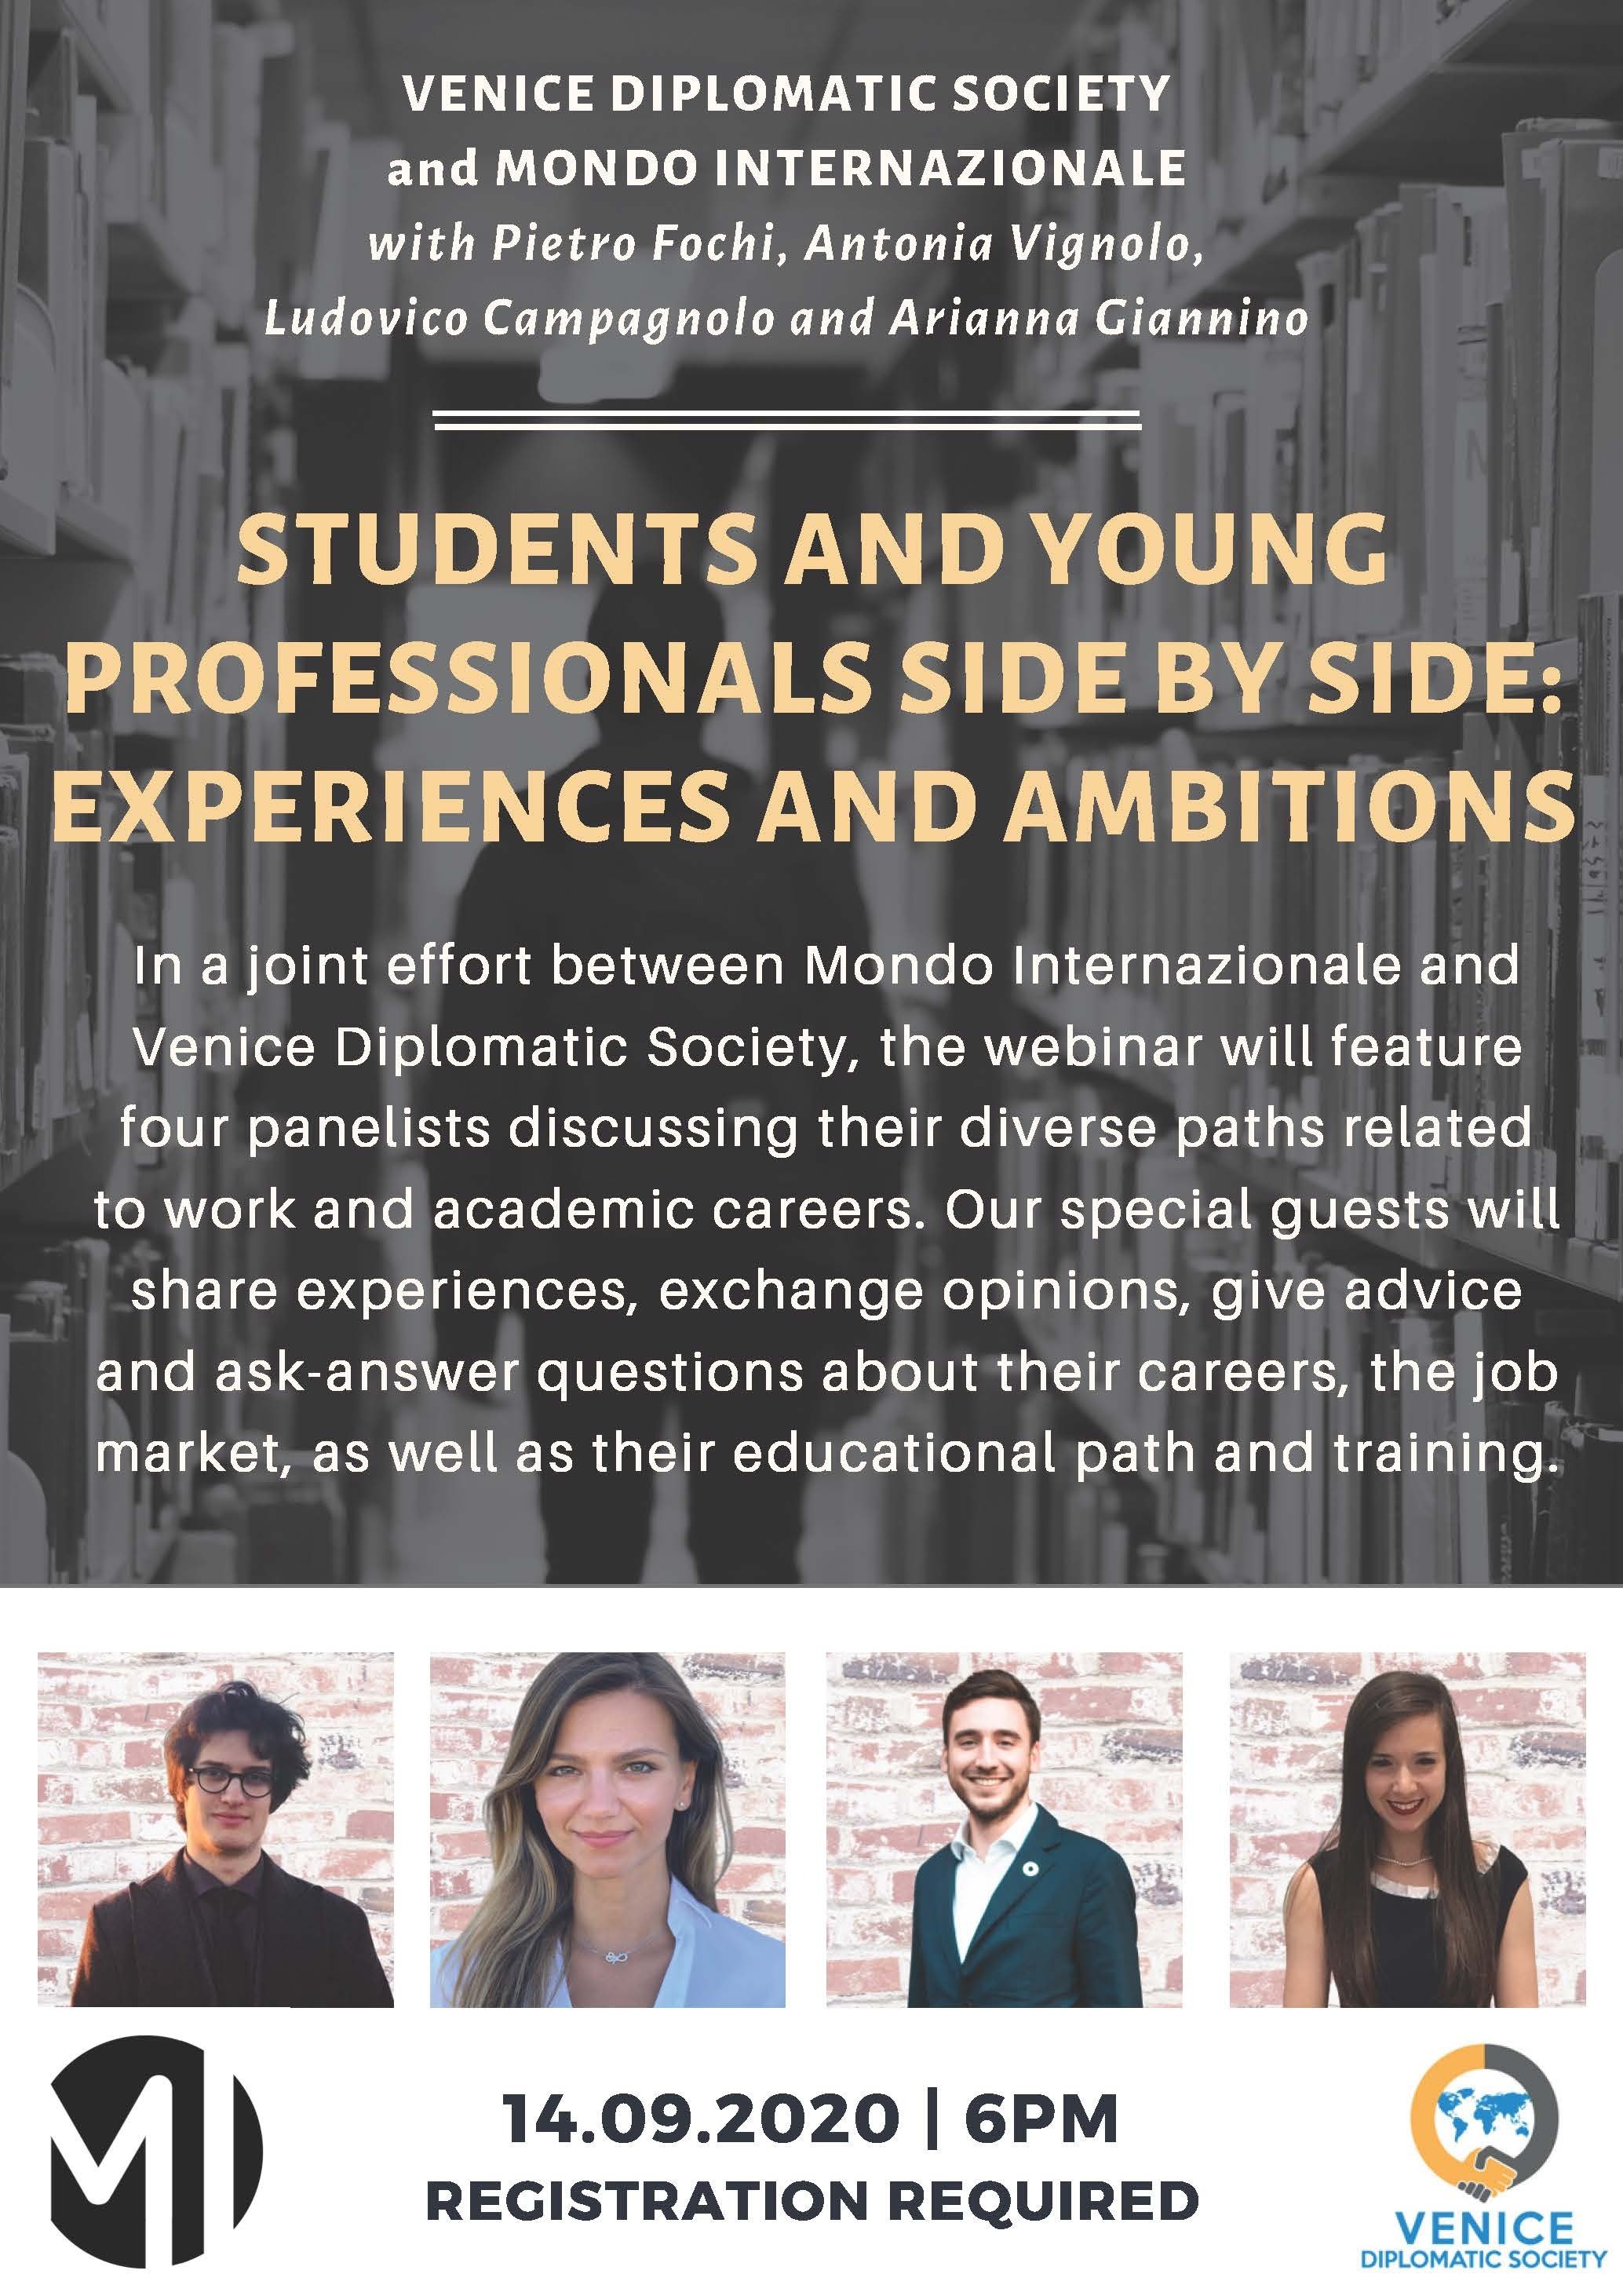 Students and Young Professionals Side by Side: Experiences and Ambitions